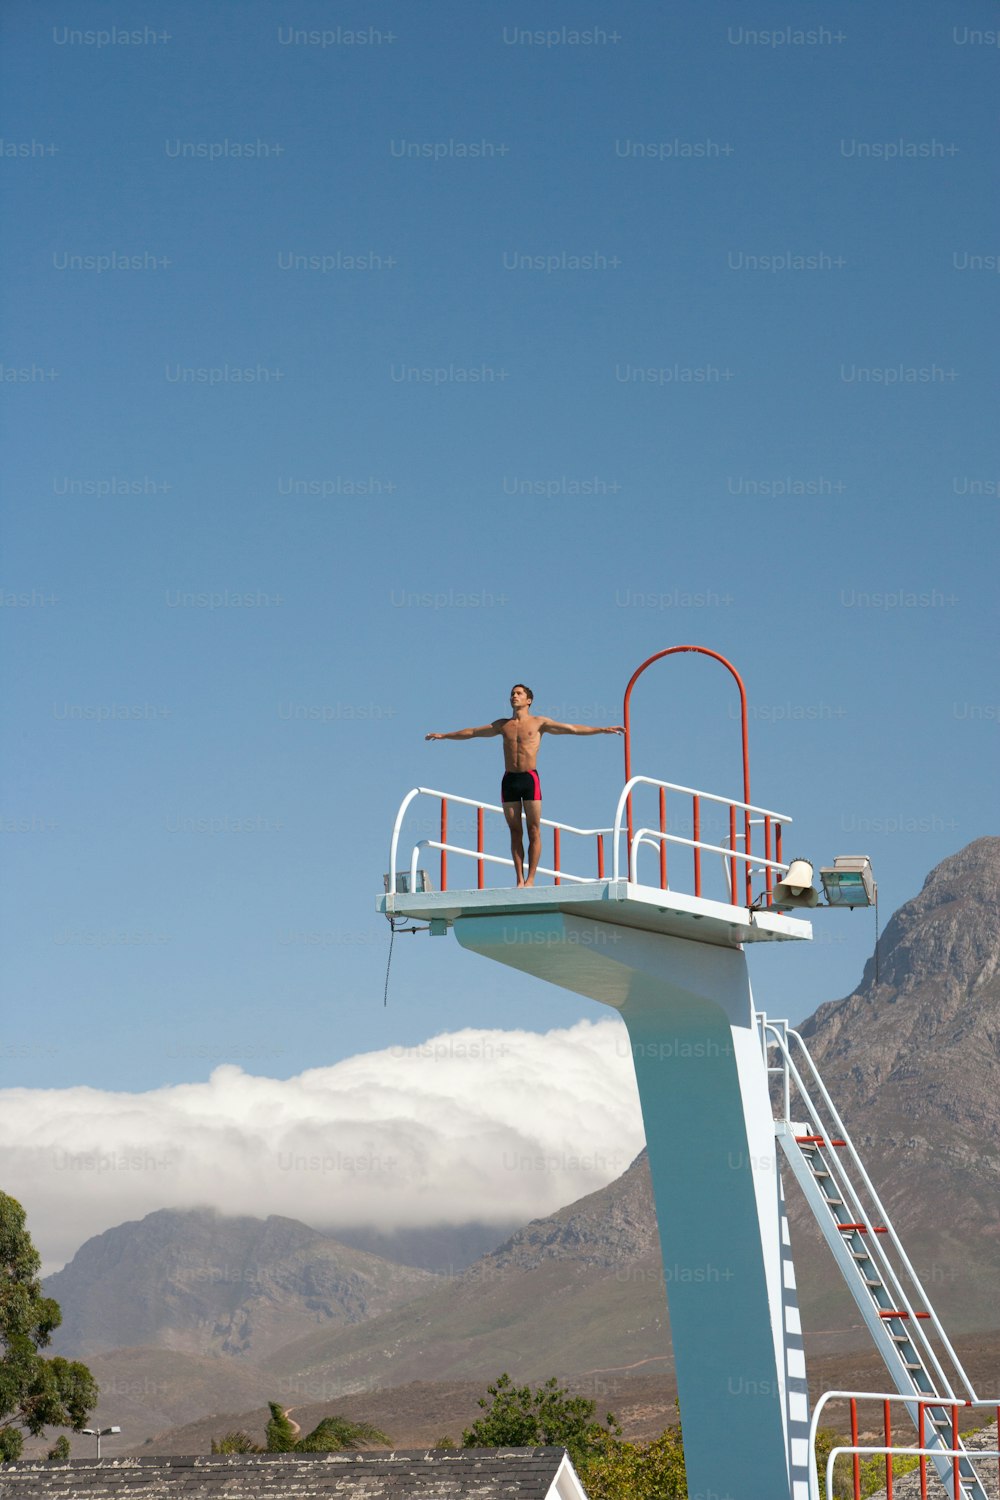 a man is standing on a life guard tower